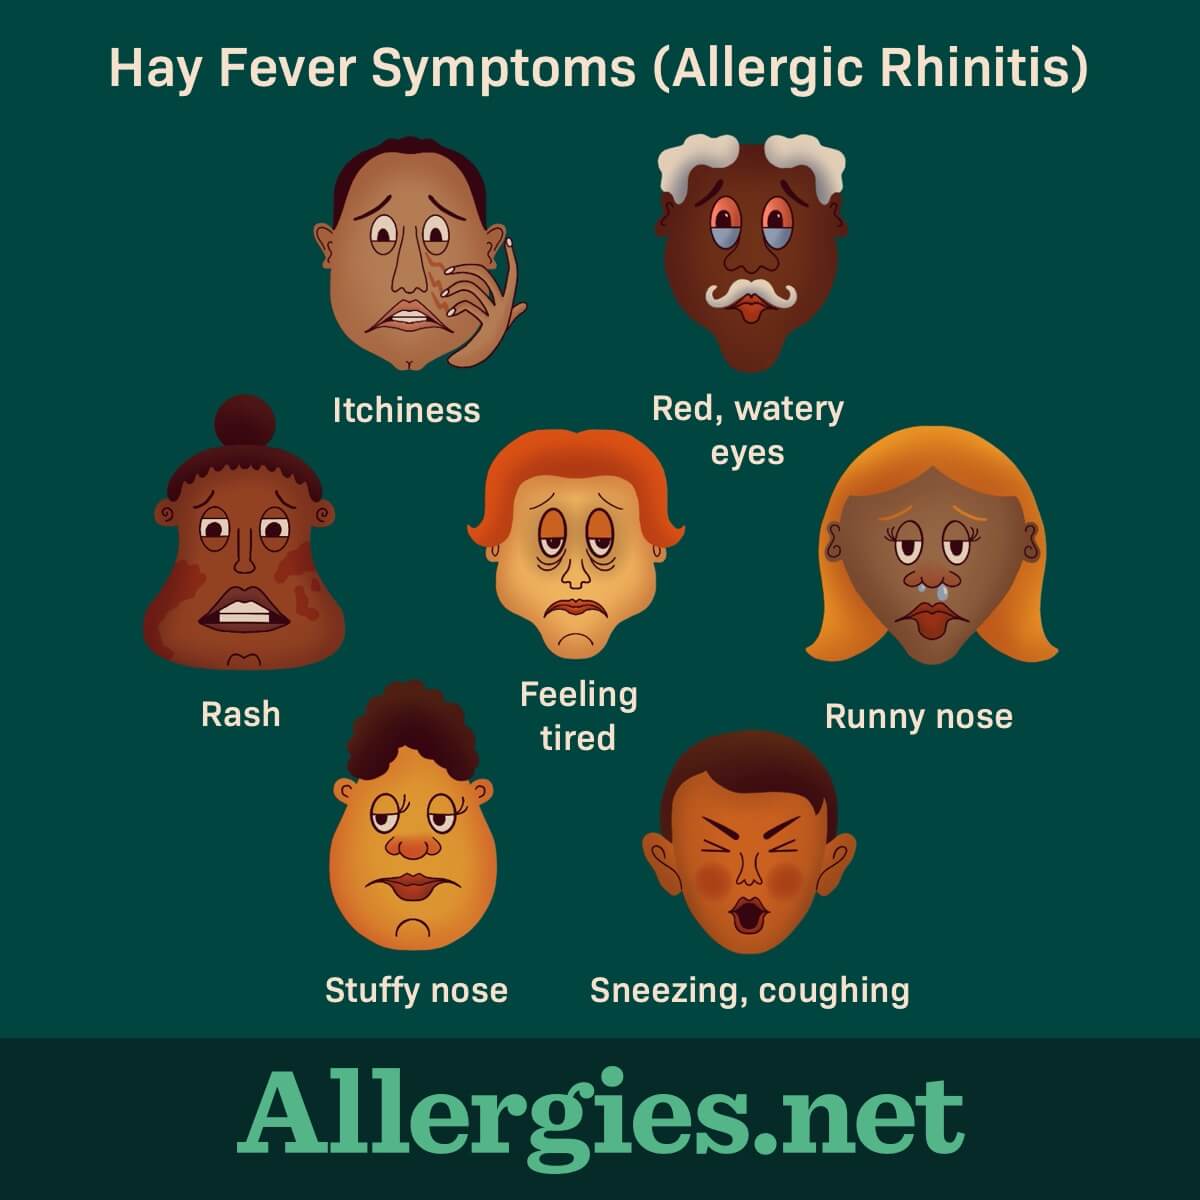 The 7 most common symptoms of hay fever are runny nose, sneezing, rash, feeling fatigue, coughing or wheezing, stuffy nose, red or watery eyes, and  itchy eyes, mouth or throat.